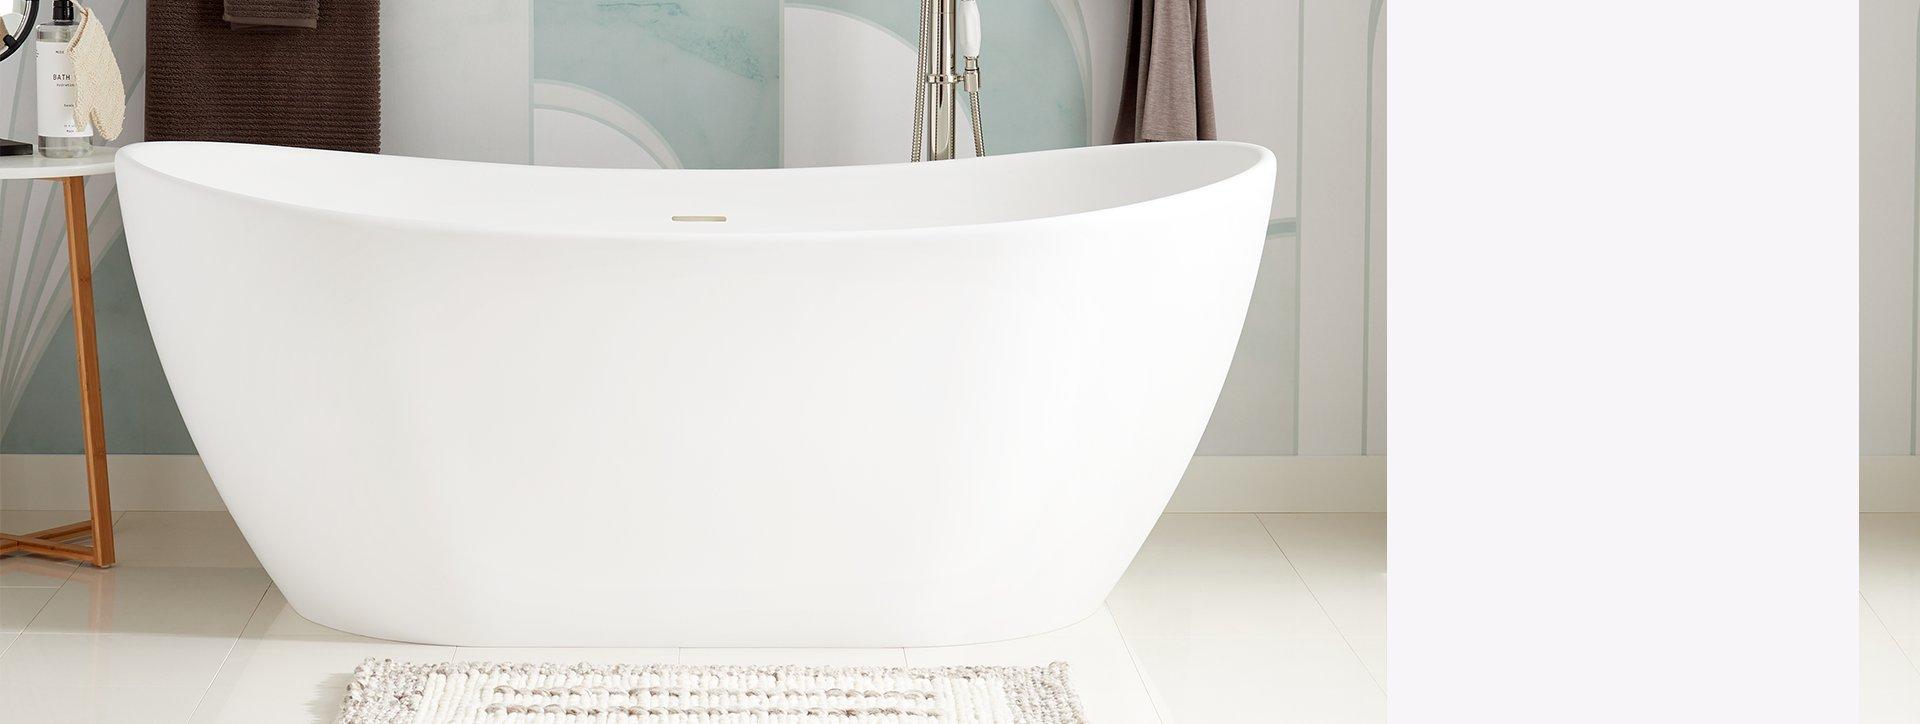 resin freestanding tub with chrome tub faucet